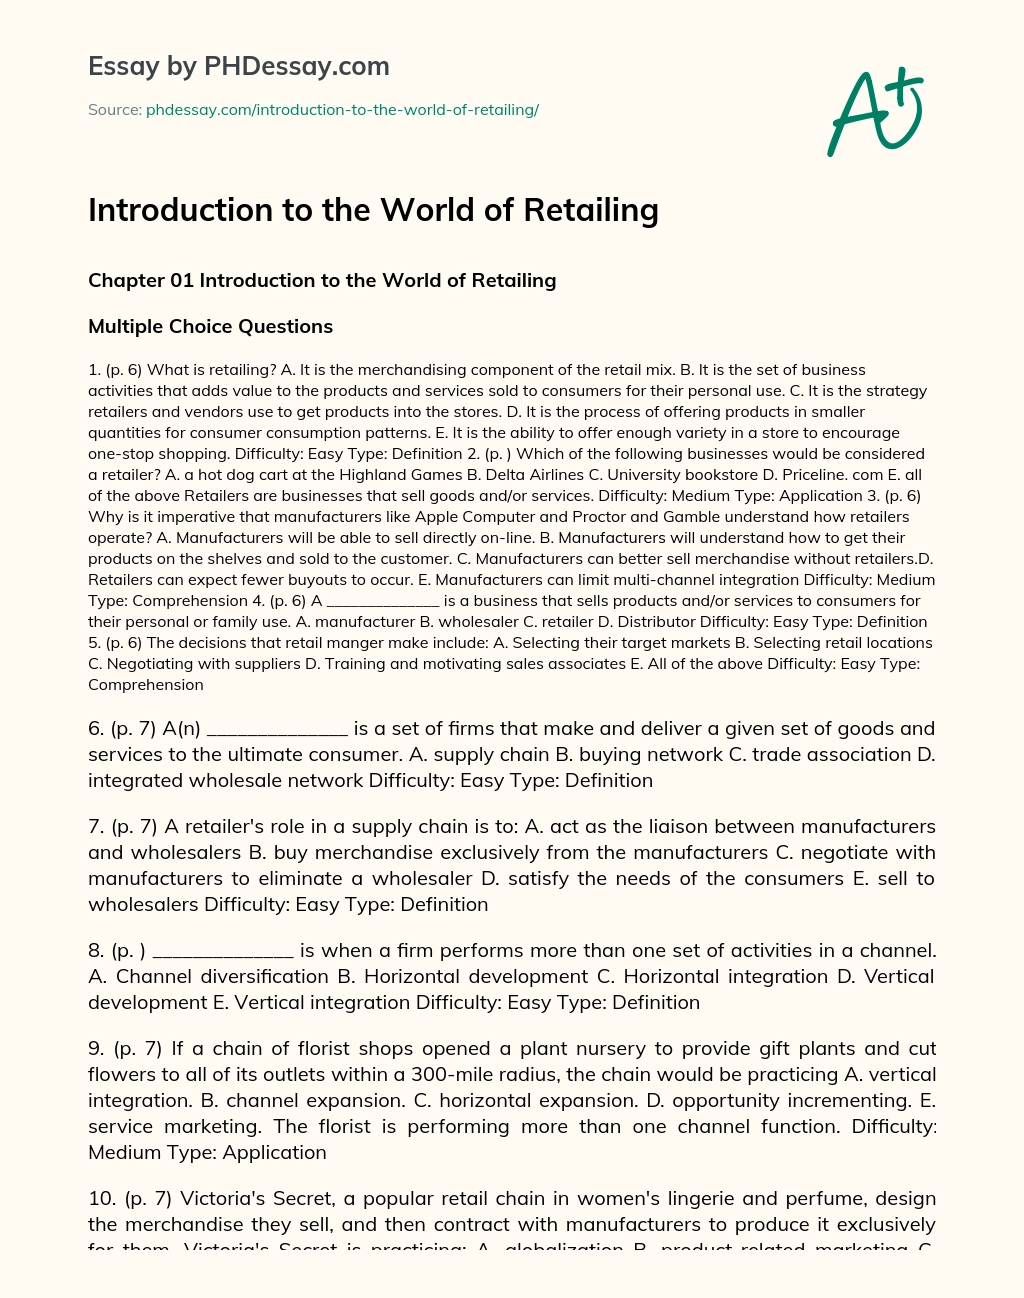 Introduction to the World of Retailing essay